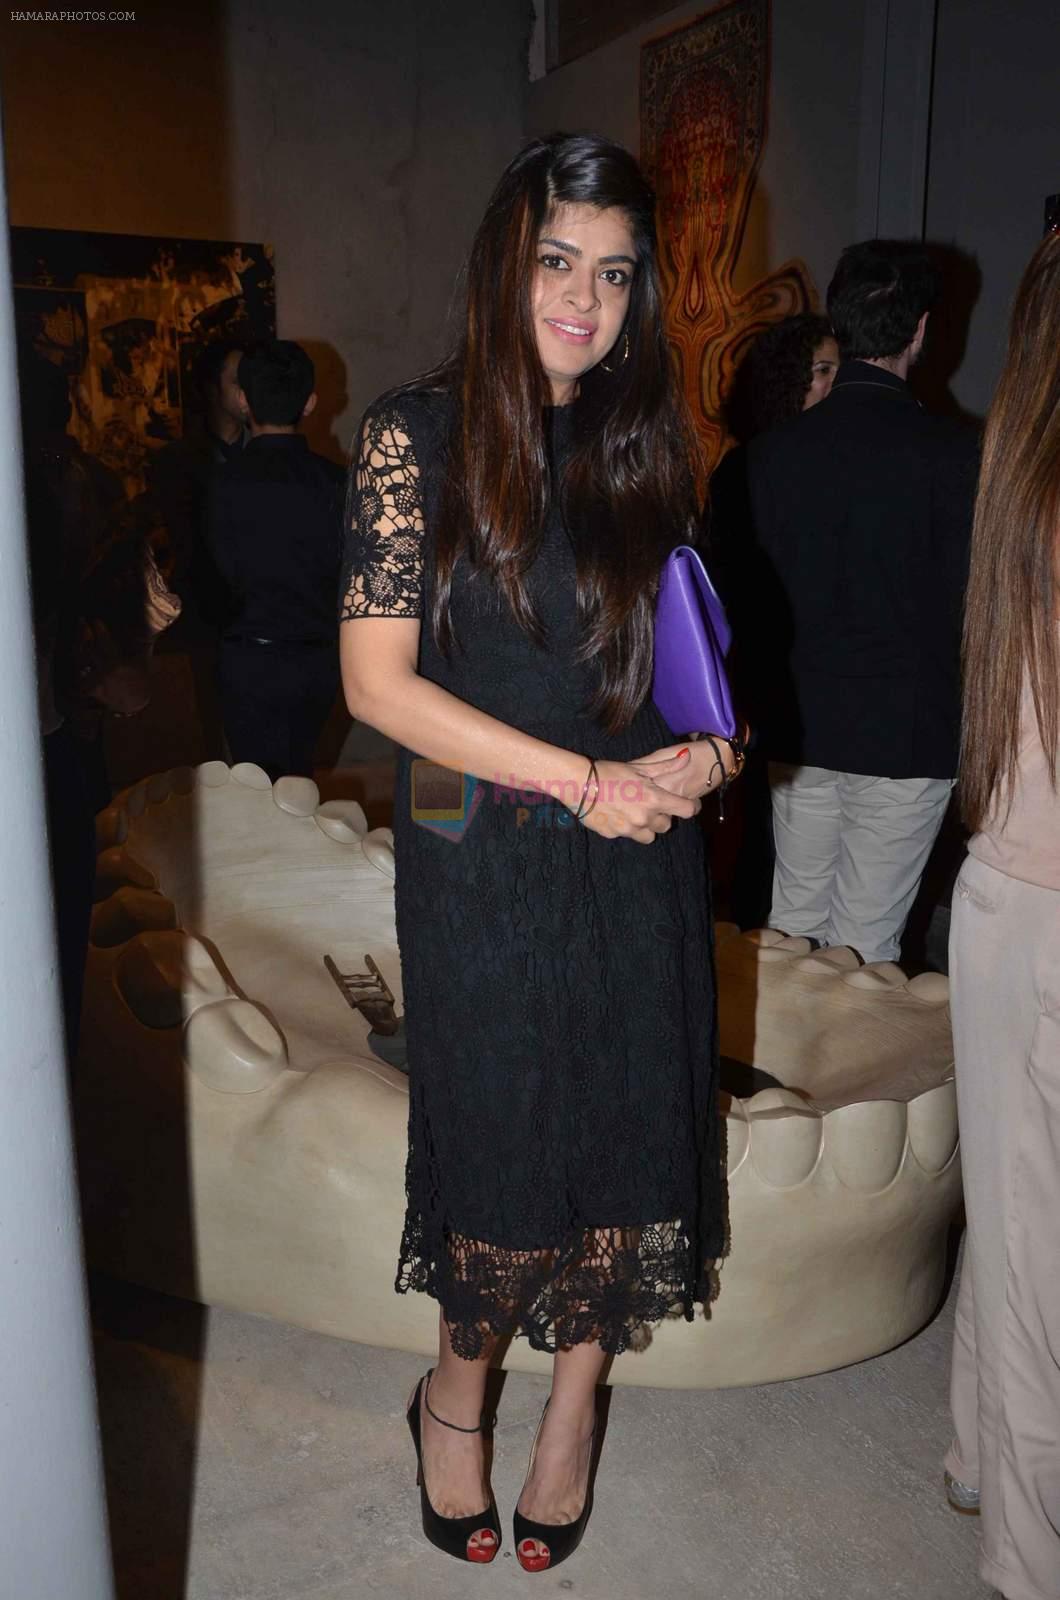 at Penny Patel's art event on 12th Jan 2016